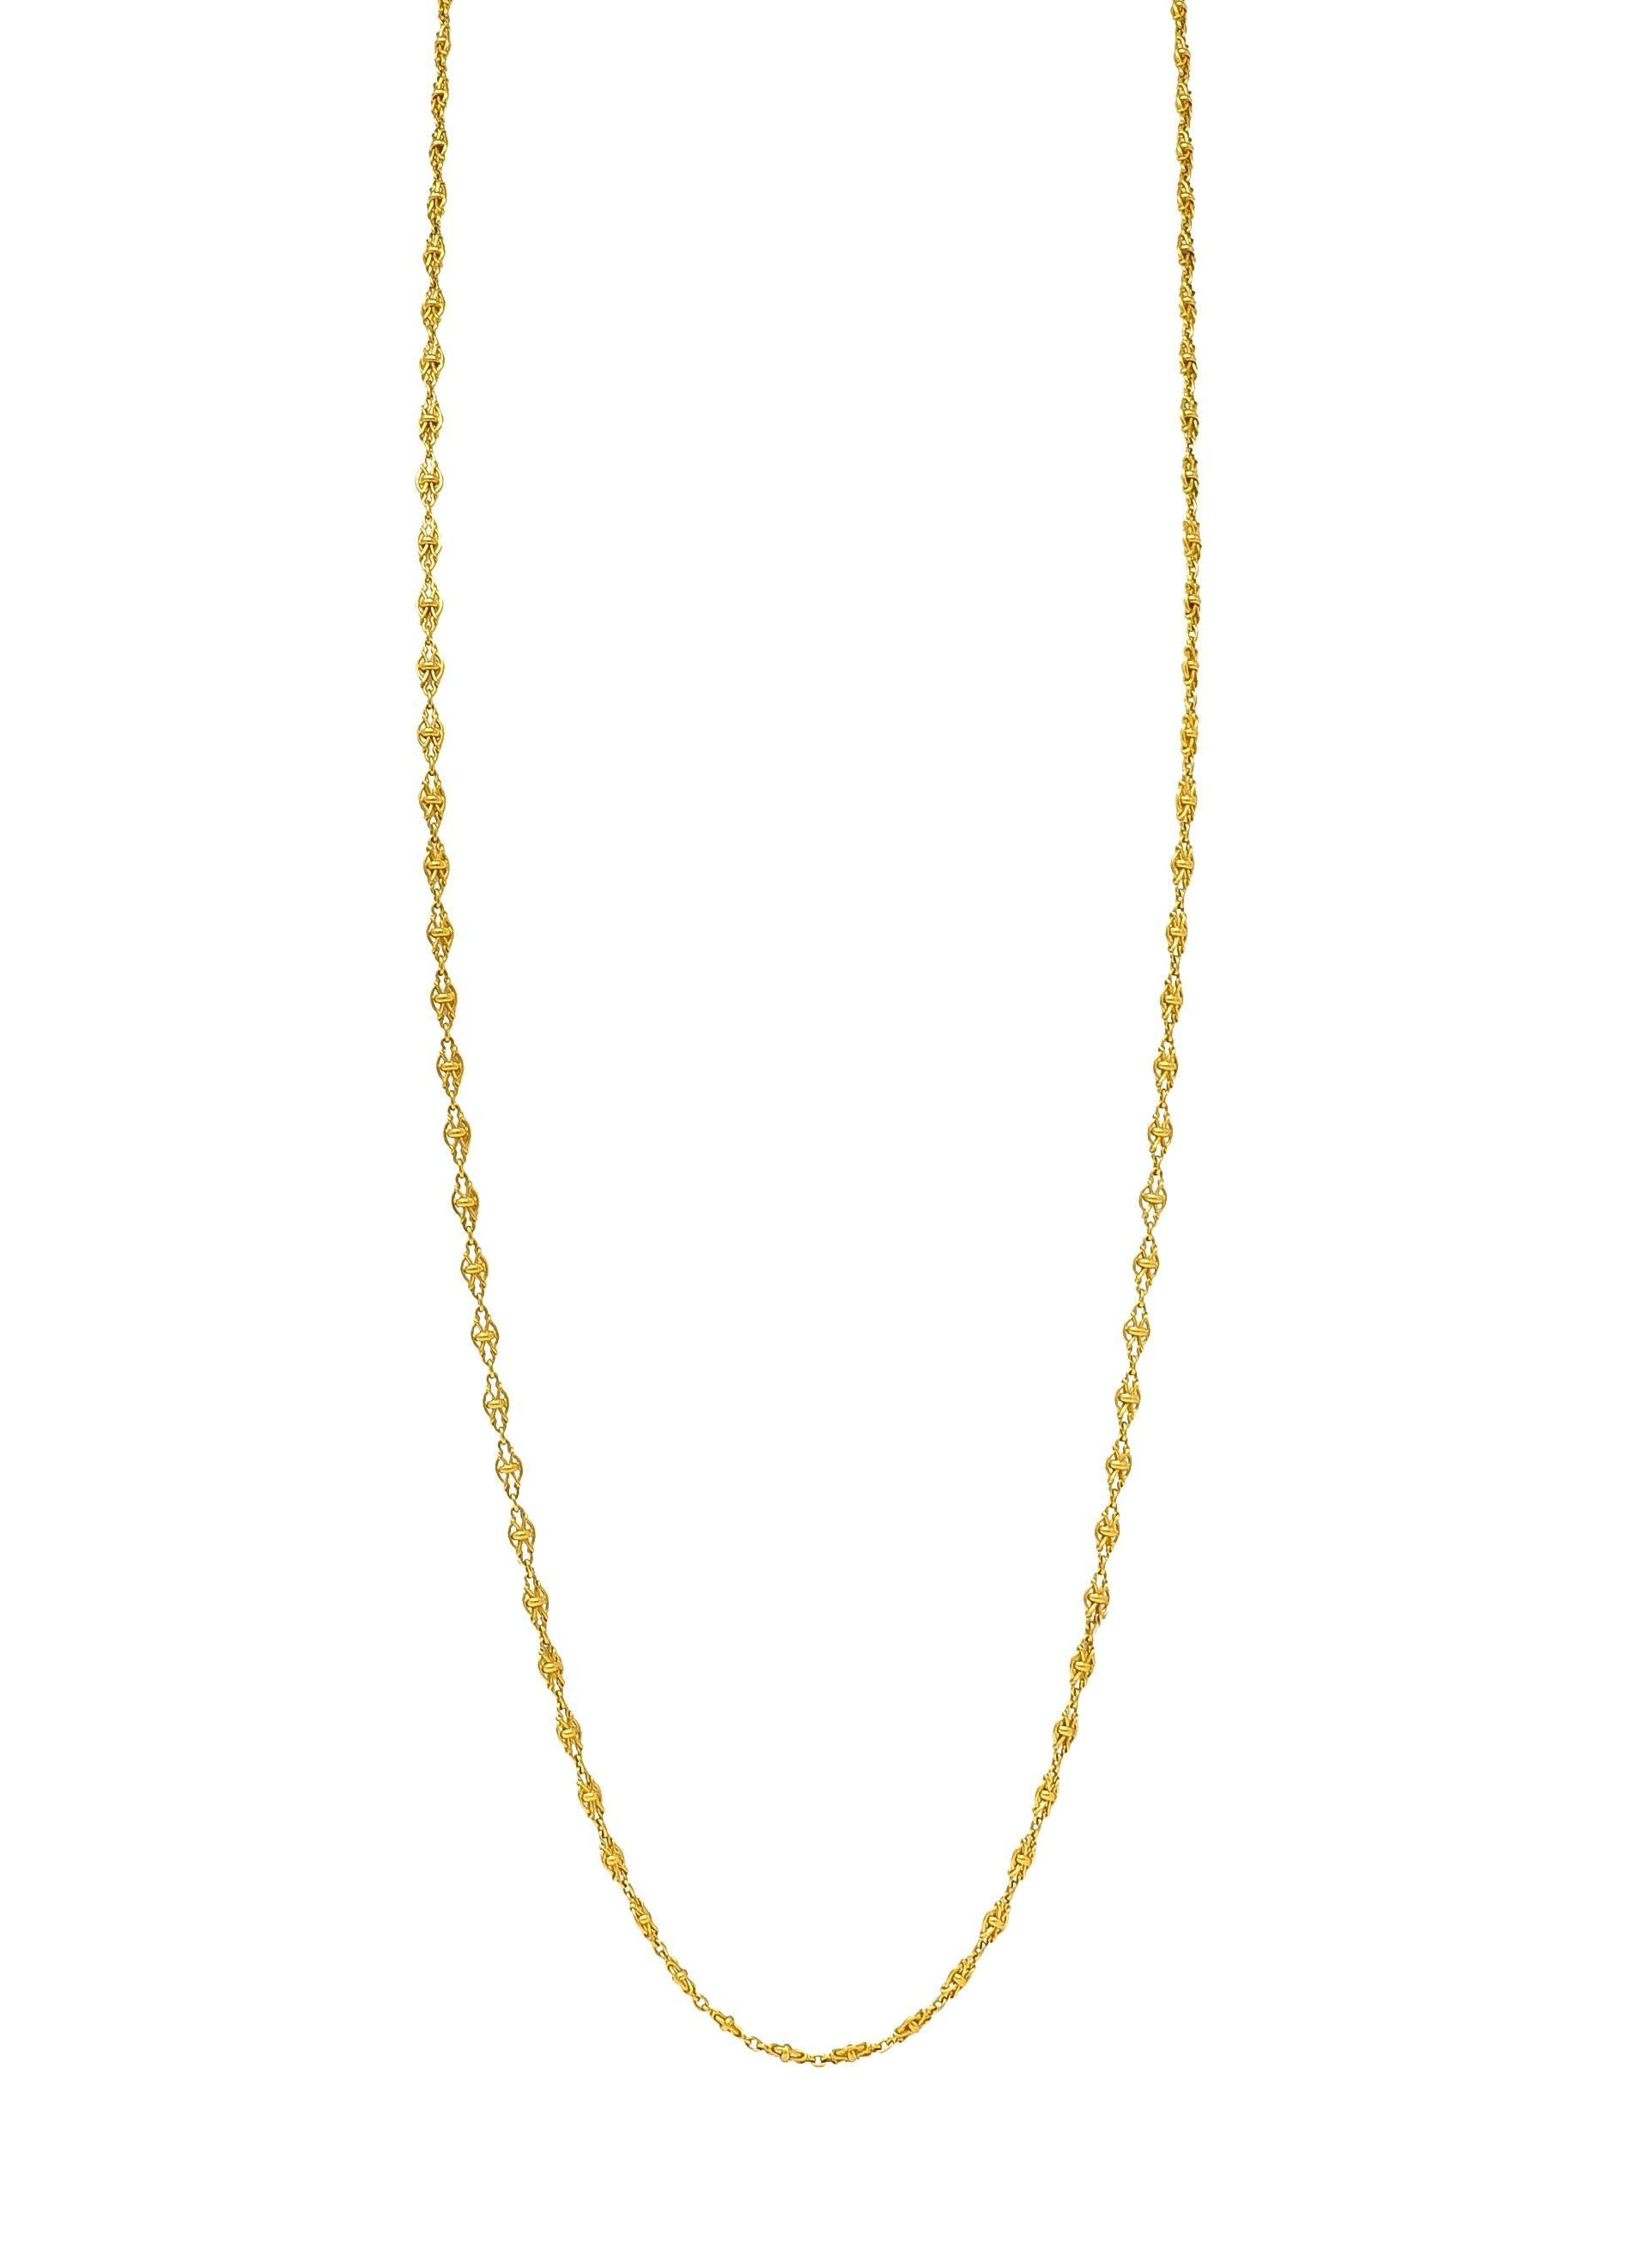 Victorian French 18 Karat Yellow Gold Knot Link Long Antique Chain Necklace For Sale 5